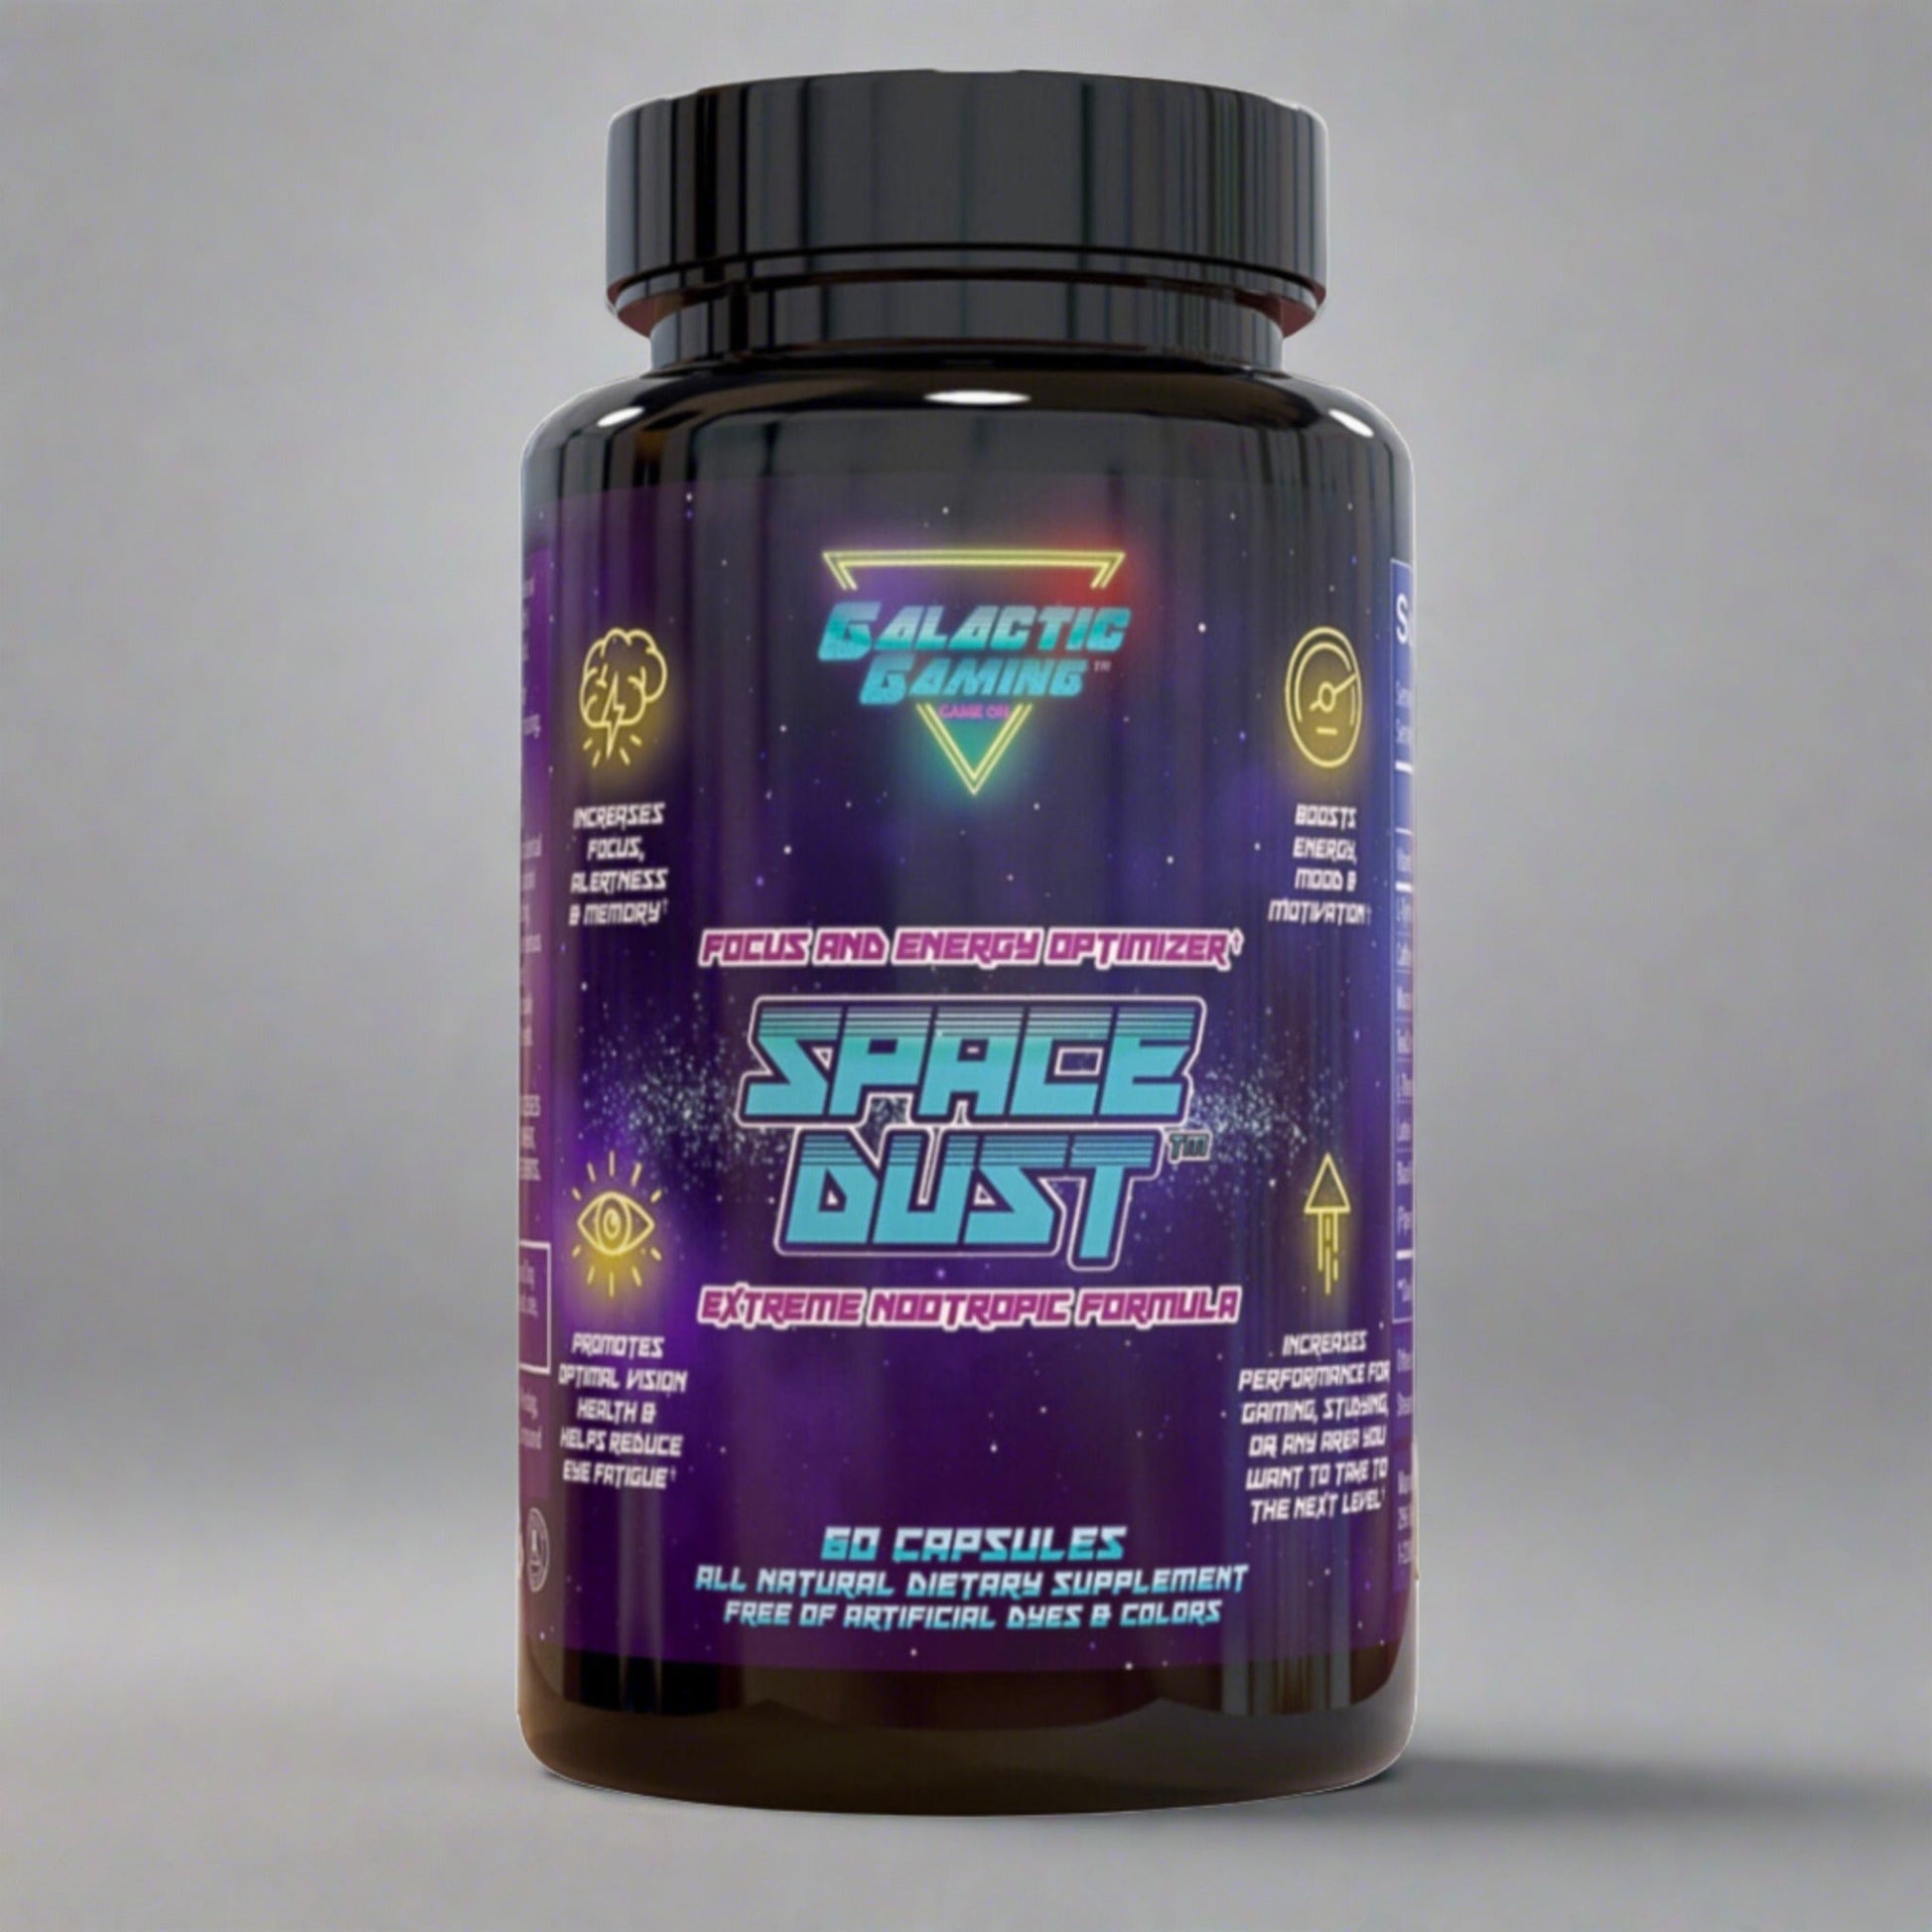 Space Dust Extreme Nootropic For Focus, Energy, Mood, and Vision